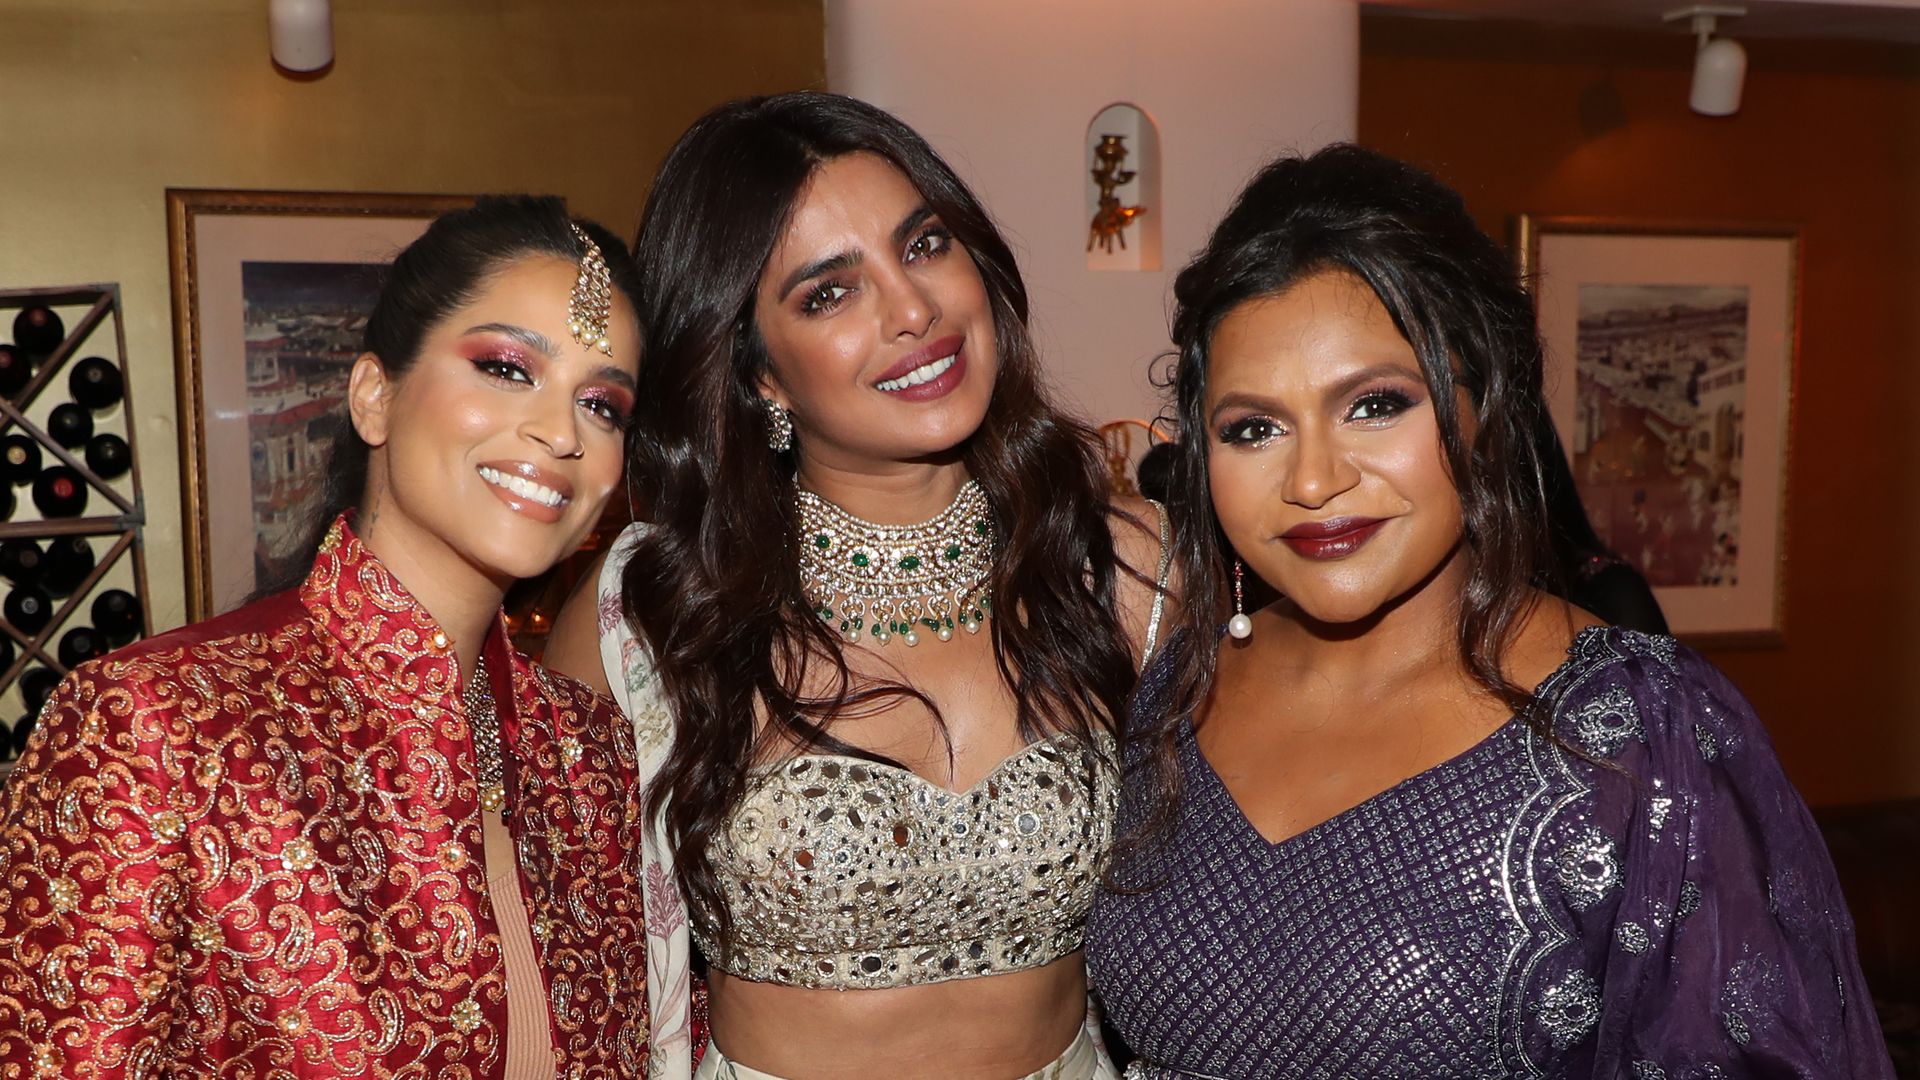 Lilly Singh, Priyanka Chopra and Mindy Kaling attend the Phenomenal x Live Tinted Diwali Dinner Hosted by Mindy Kaling on November 03, 2021 in Los Angeles, California.